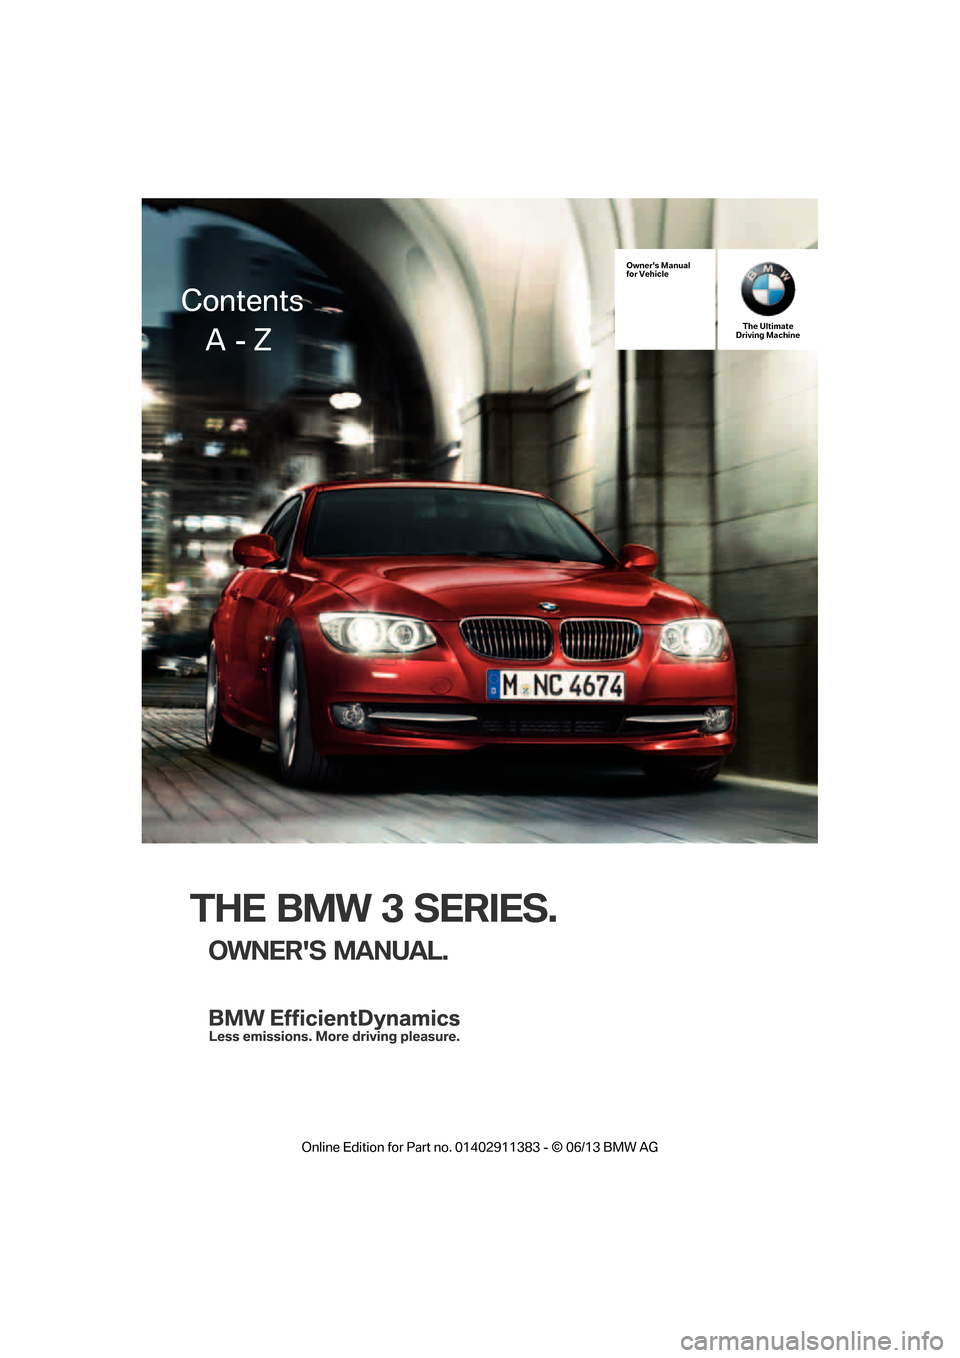 BMW 3 SERIES CONVERTIBLE 2013 E93 Owners Manual THE BMW 3 SERIES.
OWNERS MANUAL.
Owners Manual
for VehicleThe Ultimate
Driving Machine
Contents
     A  - Z

�2�Q�O�L�Q�H �(�G�L�W�L�R�Q �I�R�U �3�D�U�W �Q�R� ����������� � �